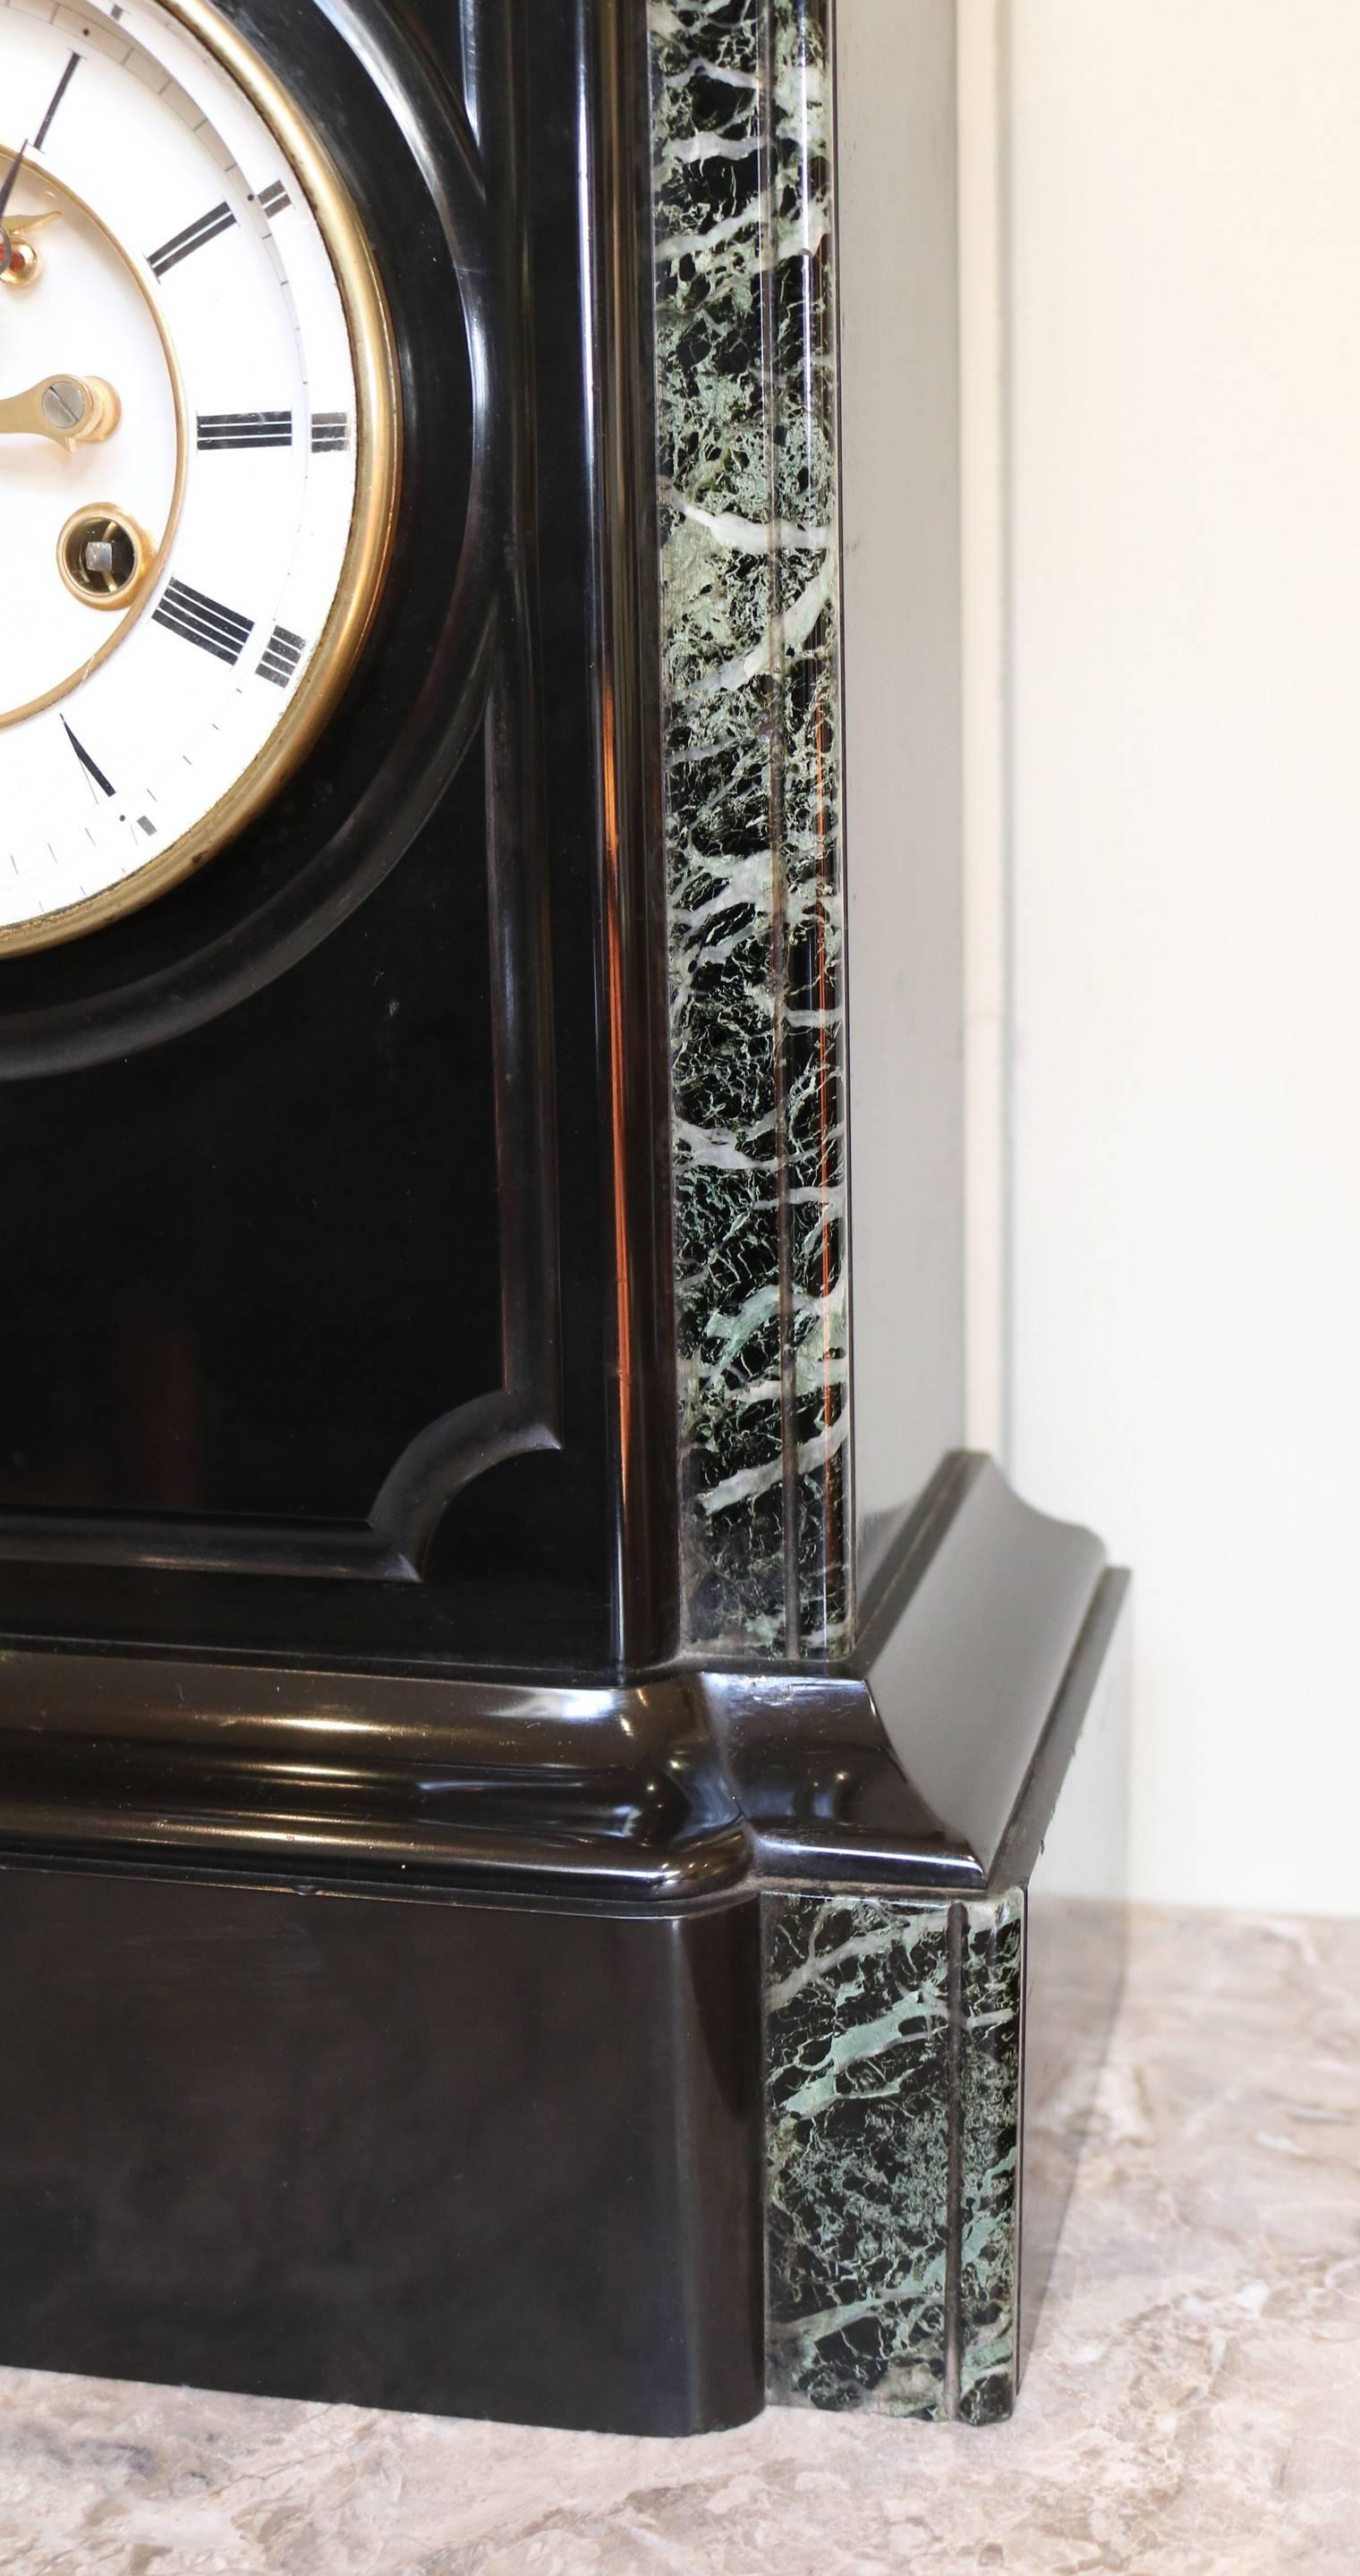 A good example of a high quality polished Belgium slate bell striking mantel clock with a visible Brocot escapement. The rectangular case has grey variegated marble sides and an engraved molding front. It has a thick bevel edge glass in a brass